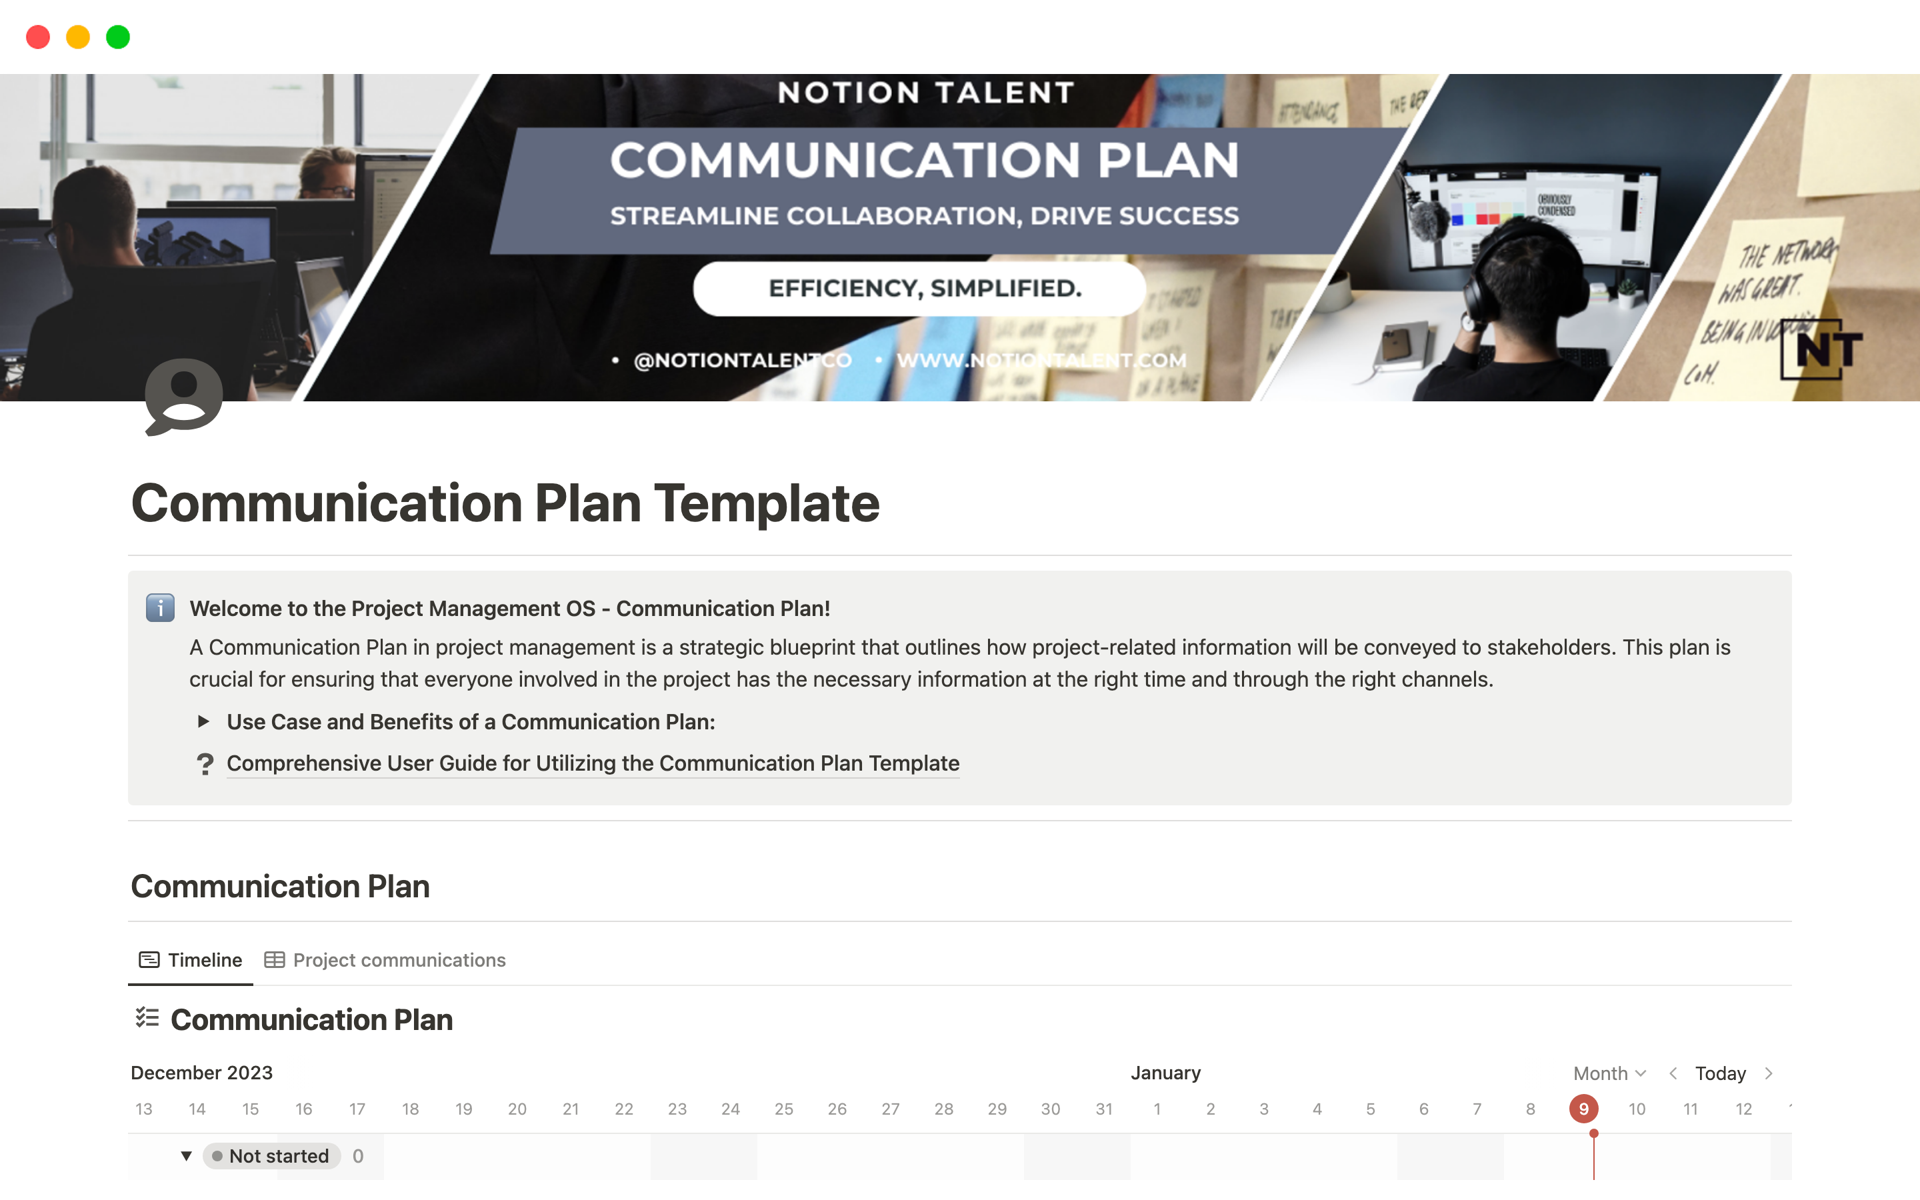 Enhance your project's effectiveness with the Notion Communication Plan Template, designed to streamline internal and external communications. This template is an essential tool for ensuring all stakeholders are well-informed and aligned with project goals.